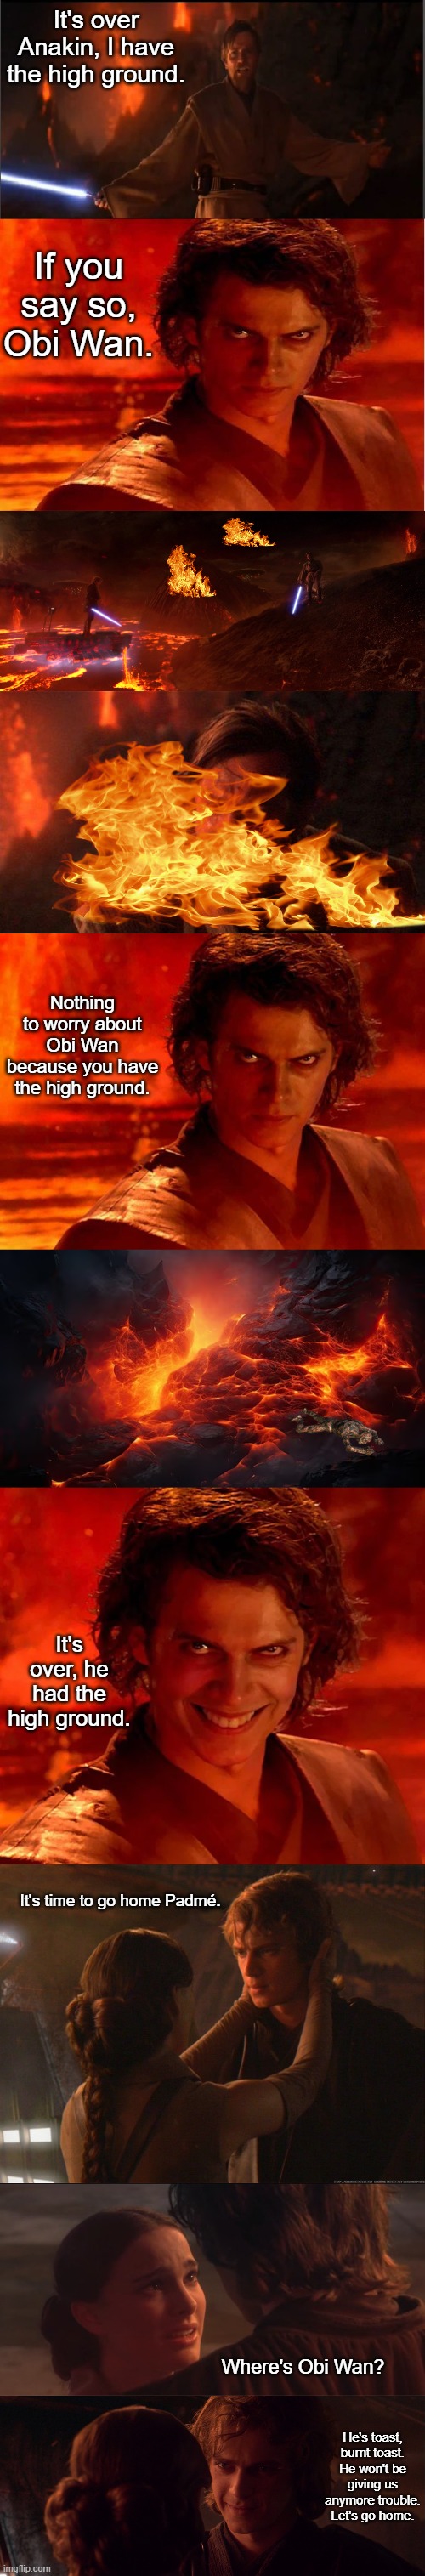 Mustafar with Happy Ending | It's over Anakin, I have the high ground. If you say so, Obi Wan. Nothing to worry about Obi Wan because you have the high ground. It's over, he had the high ground. It's time to go home Padmé. Where's Obi Wan? He's toast, burnt toast. He won't be giving us anymore trouble. Let's go home. | image tagged in high ground,memes,you were the chosen one star wars,you underestimate my power,funny | made w/ Imgflip meme maker